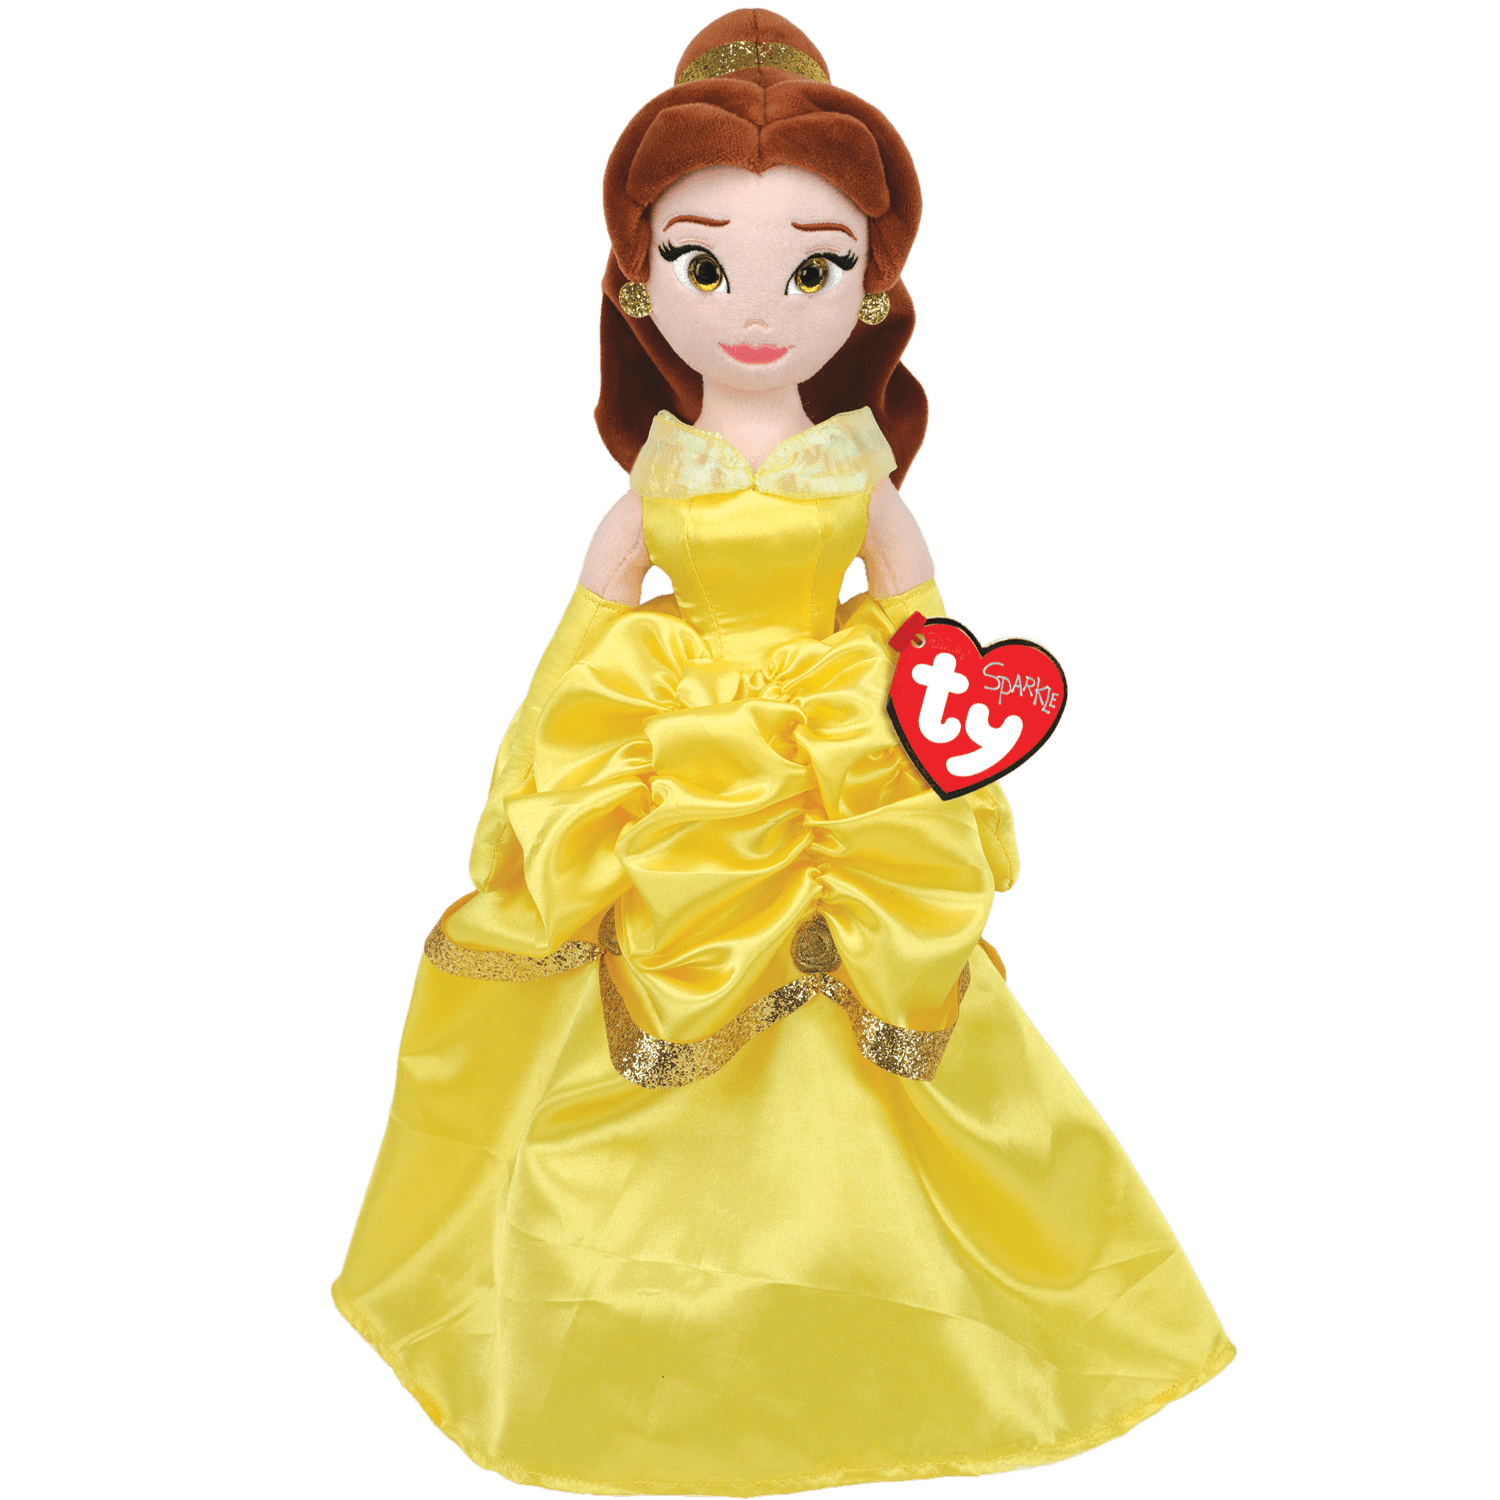 TY Beauty and the Beast Belle Collectible Plush Toy